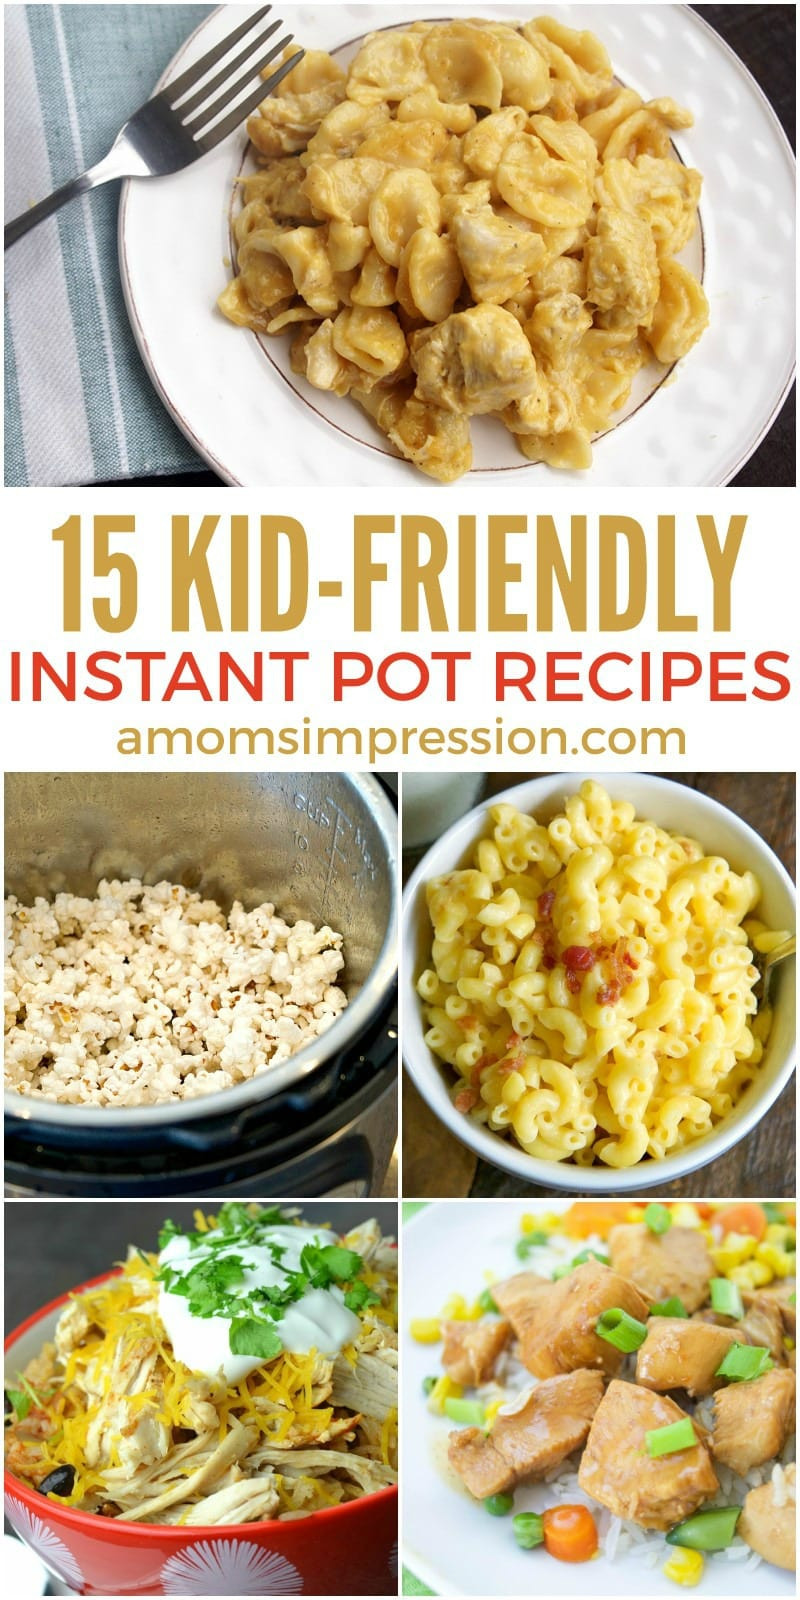 Easy Kid Friendly Dinner Ideas
 25 Quick and Easy Kid Friendly Instant Pot Recipes A Mom